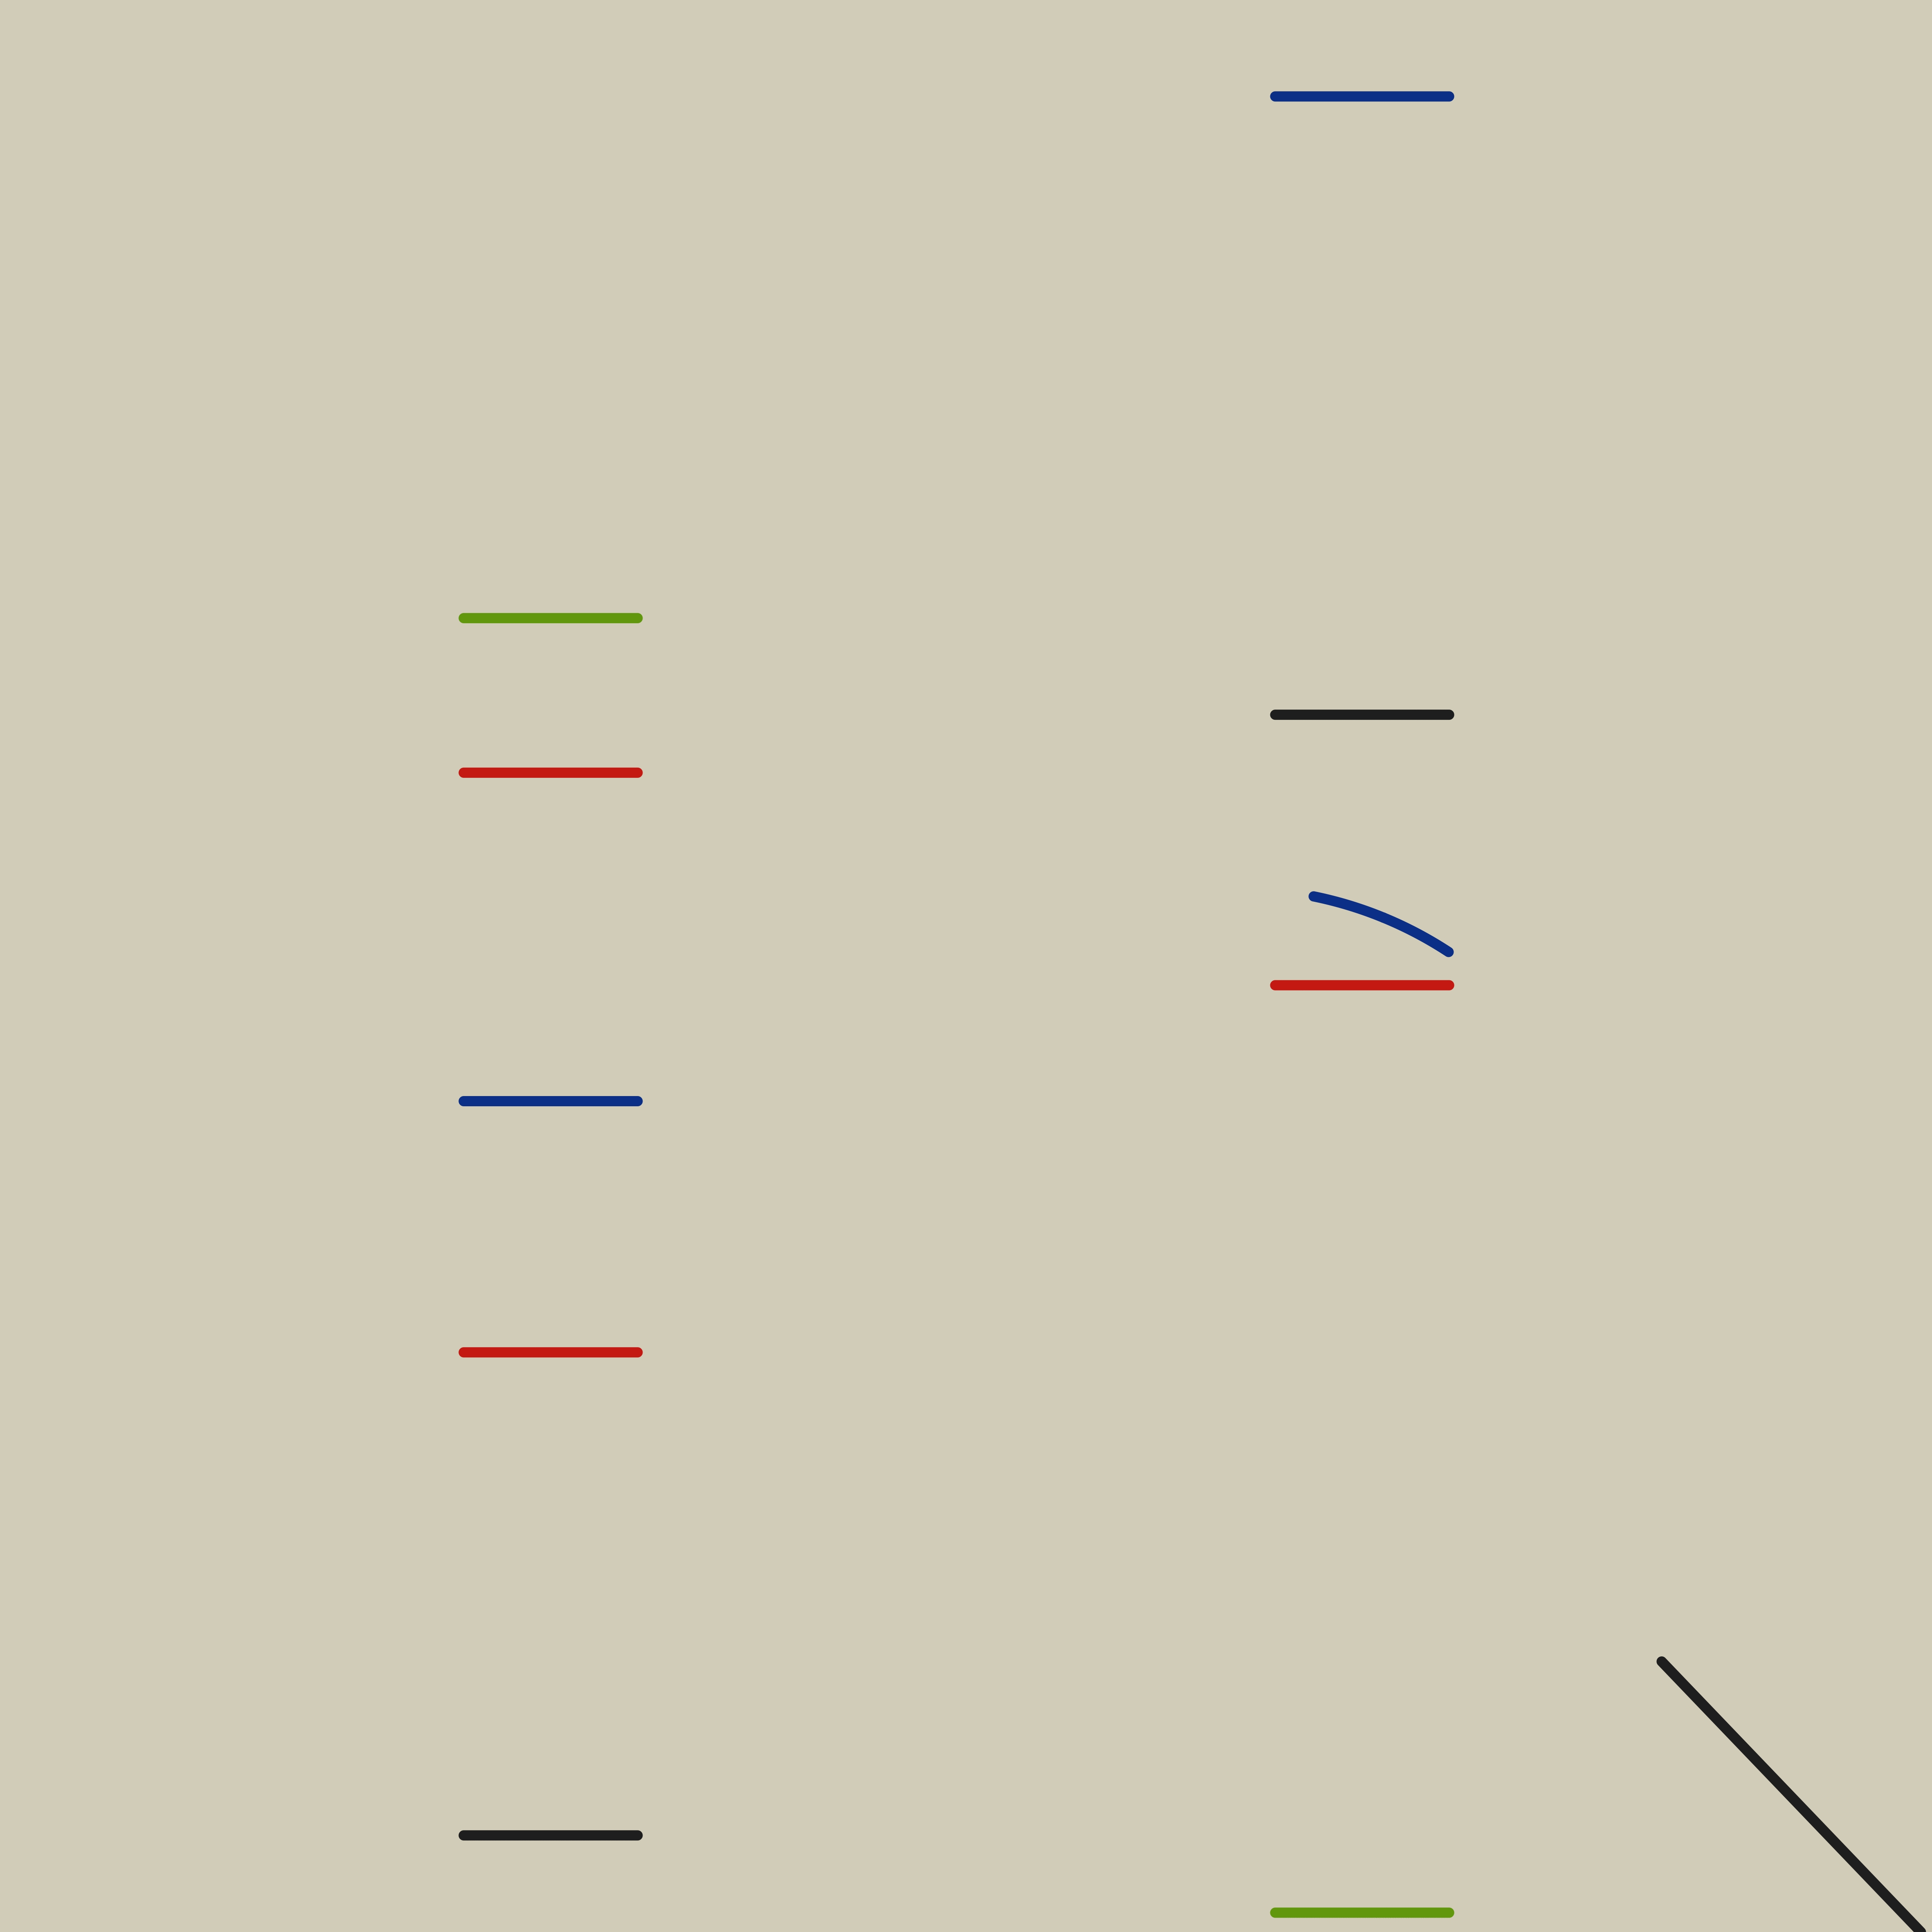 A recreation of Curves and Straight Lines (1948) by Alfred Hlito. This version is an animated gif where each frame is a new veresion of Hlito's original with randomisation that varies the length and placement of the elements: a horizontal black stripe, several short horizontal lines of various colours and two circles, one blue, one dark yellow; all on a cream background.